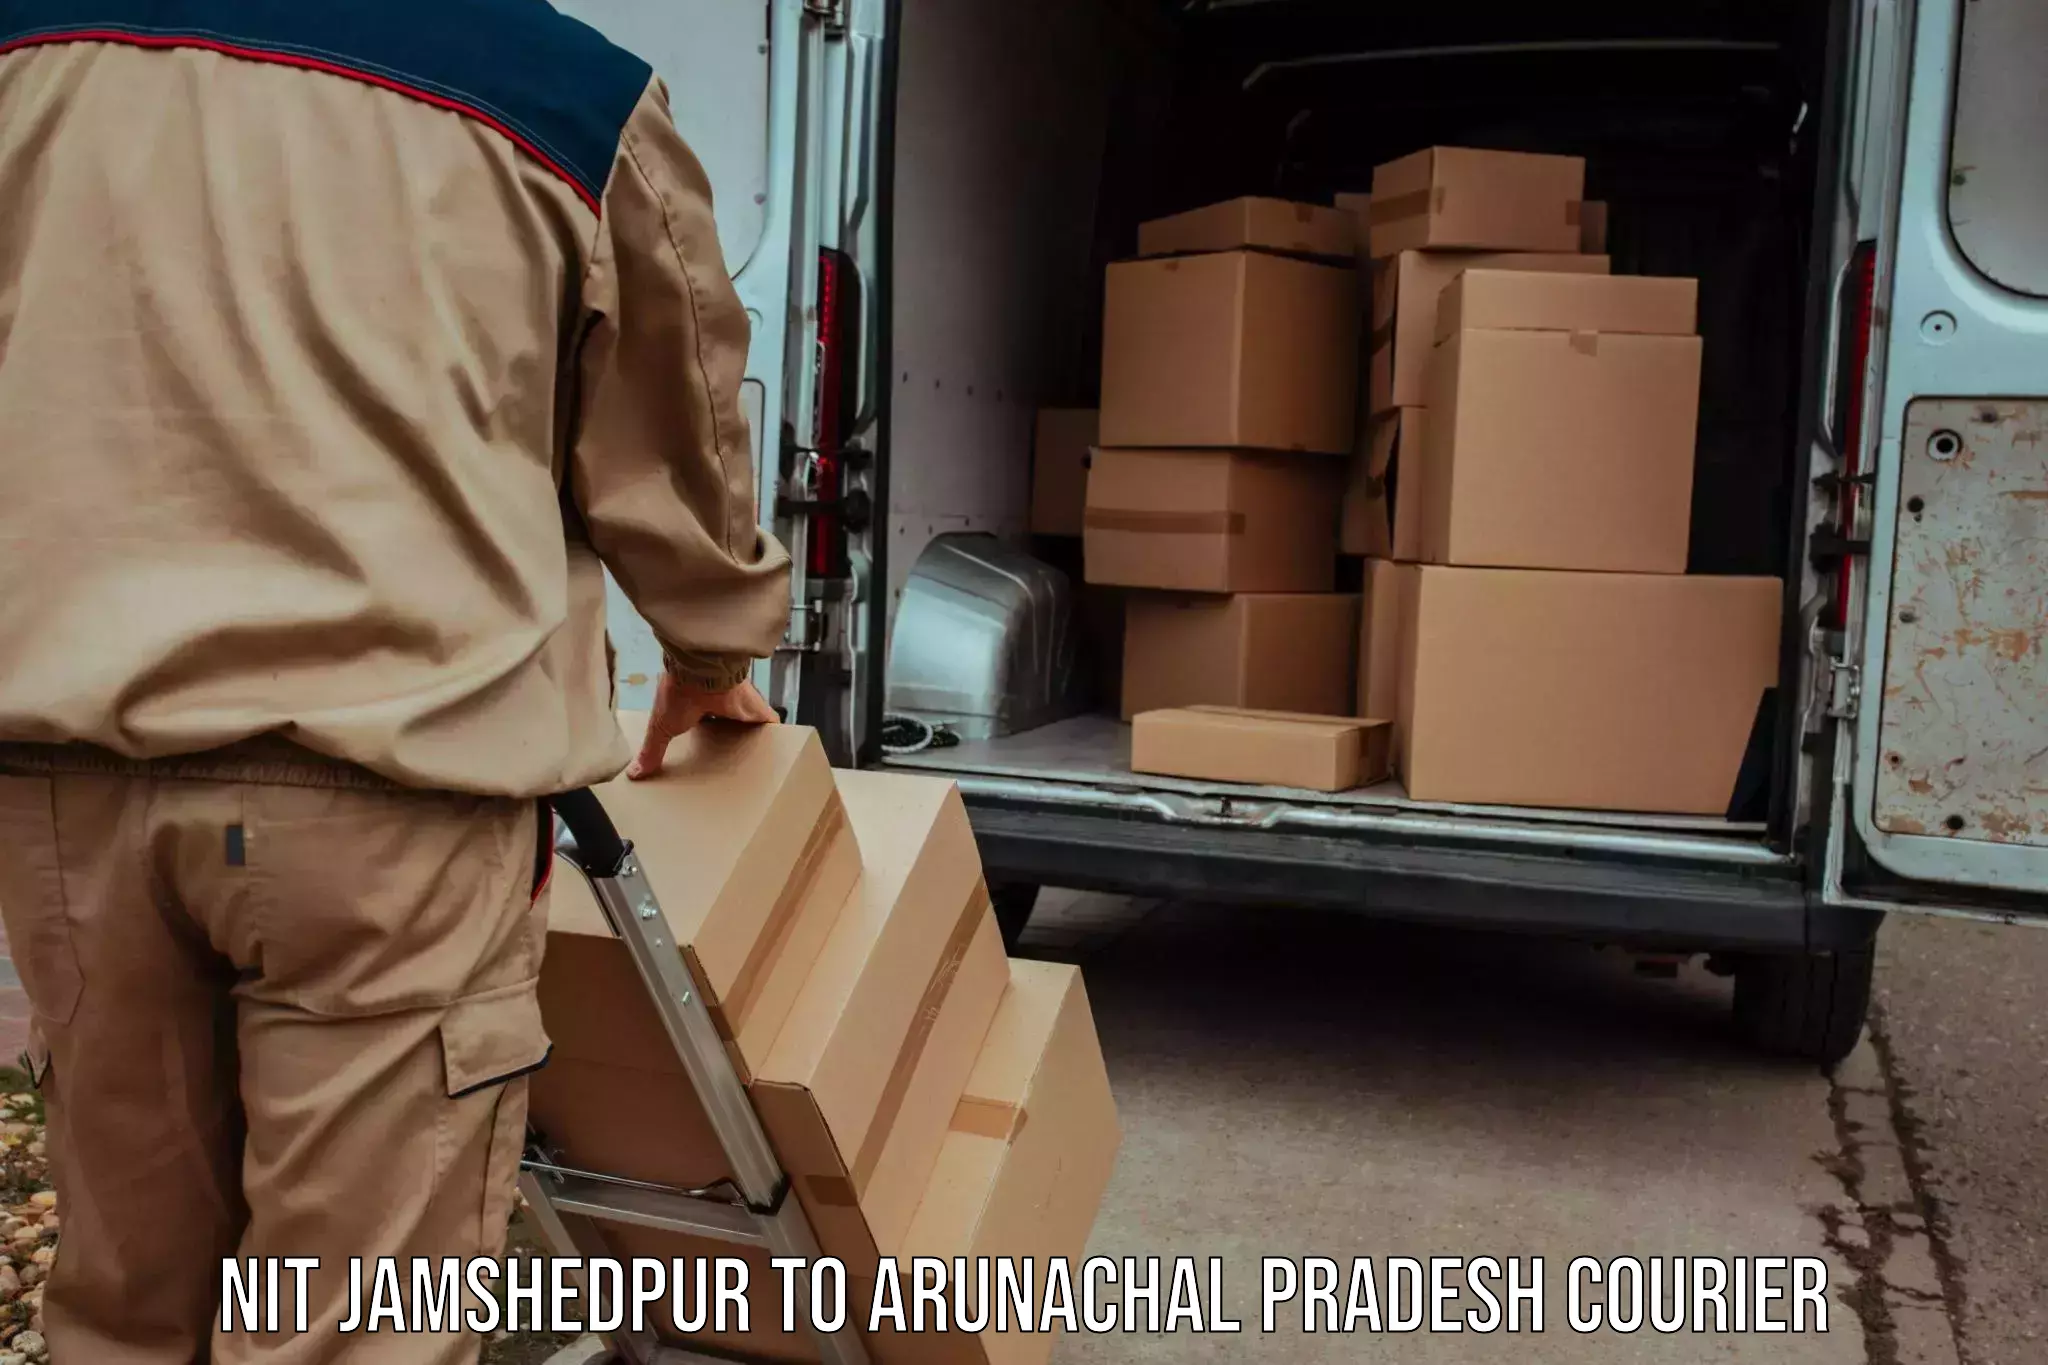 Express mail solutions NIT Jamshedpur to Lohit